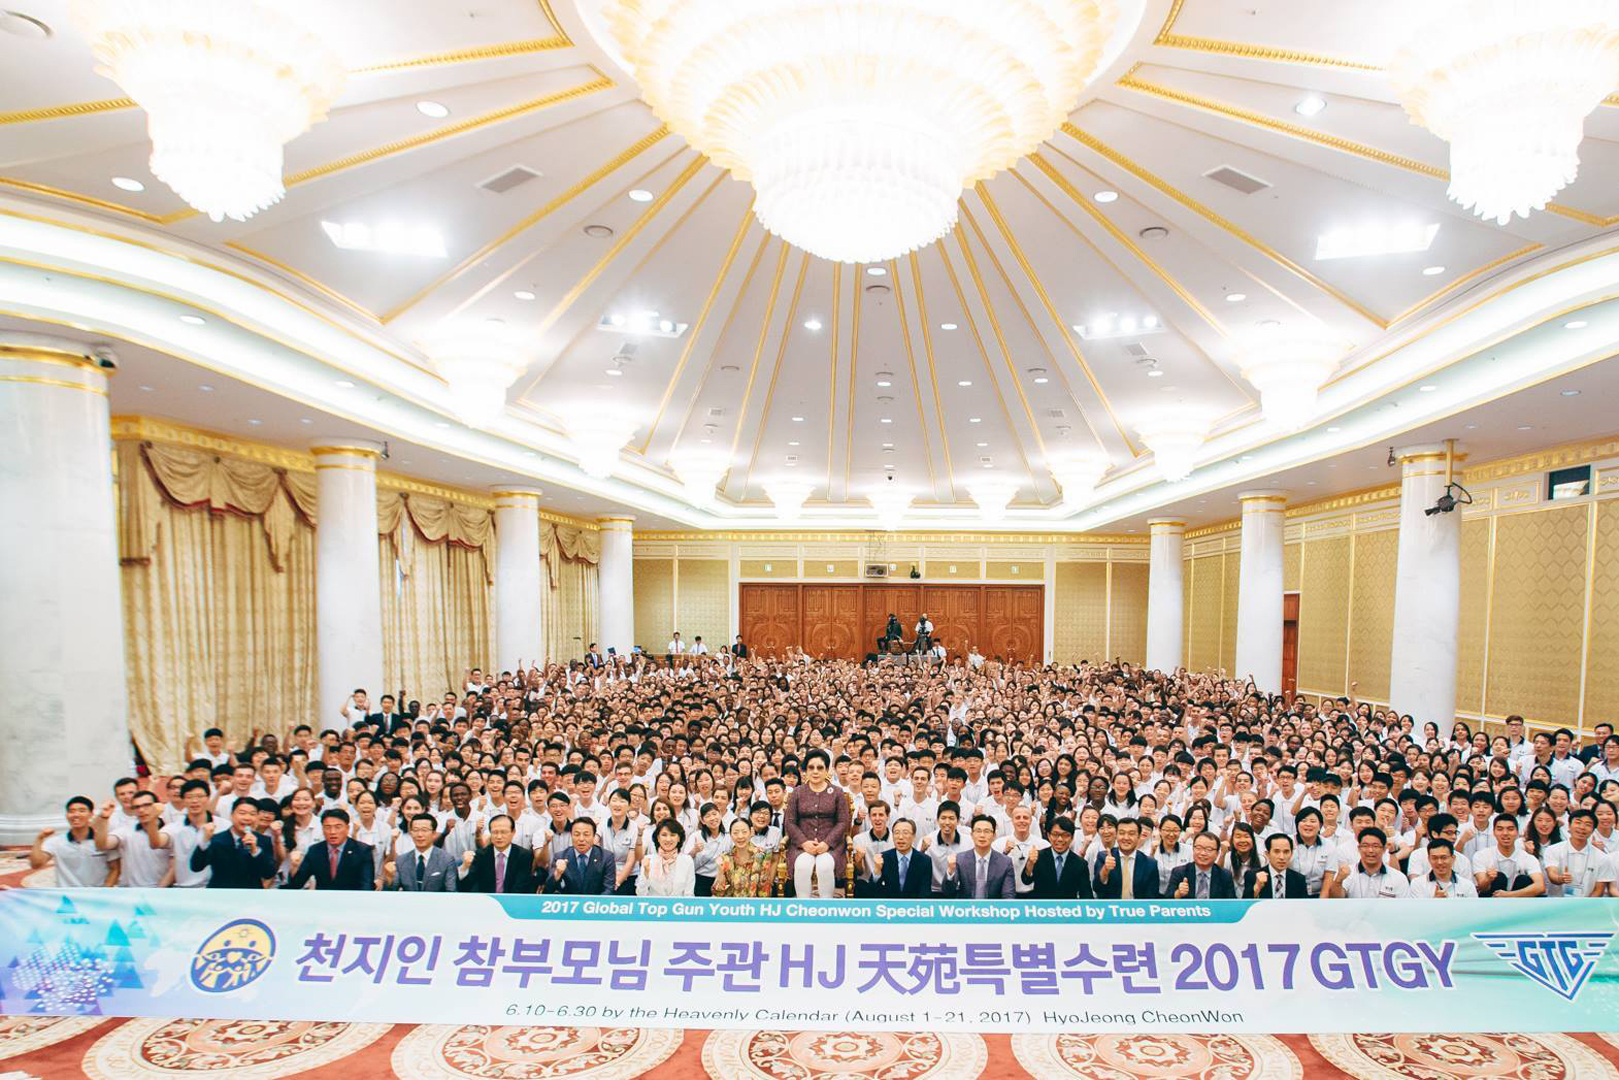 True Parents' HJ Cheonwon Special Workshop: The 2017 Global Top Gun Youth Workshop Opening Ceremony (August 3, Cheon Jeong Gung)